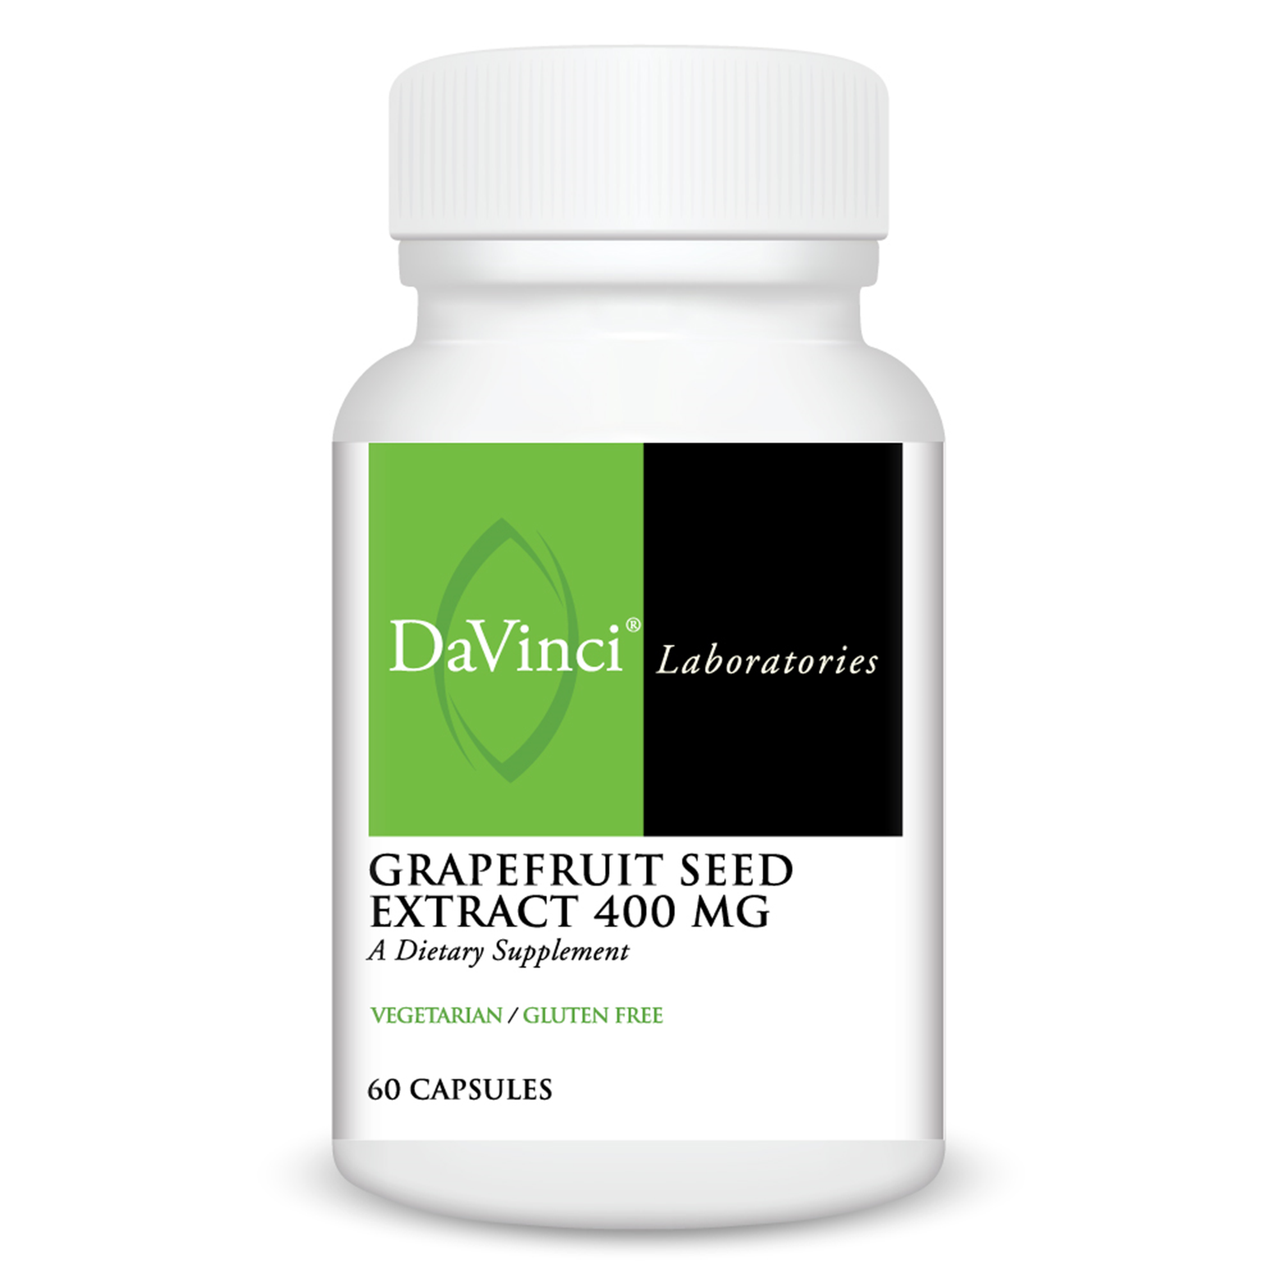 DAVINCI Labs Grapefruit Seed Extract 400 mg - Supports GI & Digestive Gut Health - Gluten Free, Vegetarian - 60 Capsules (30-Day Supply)